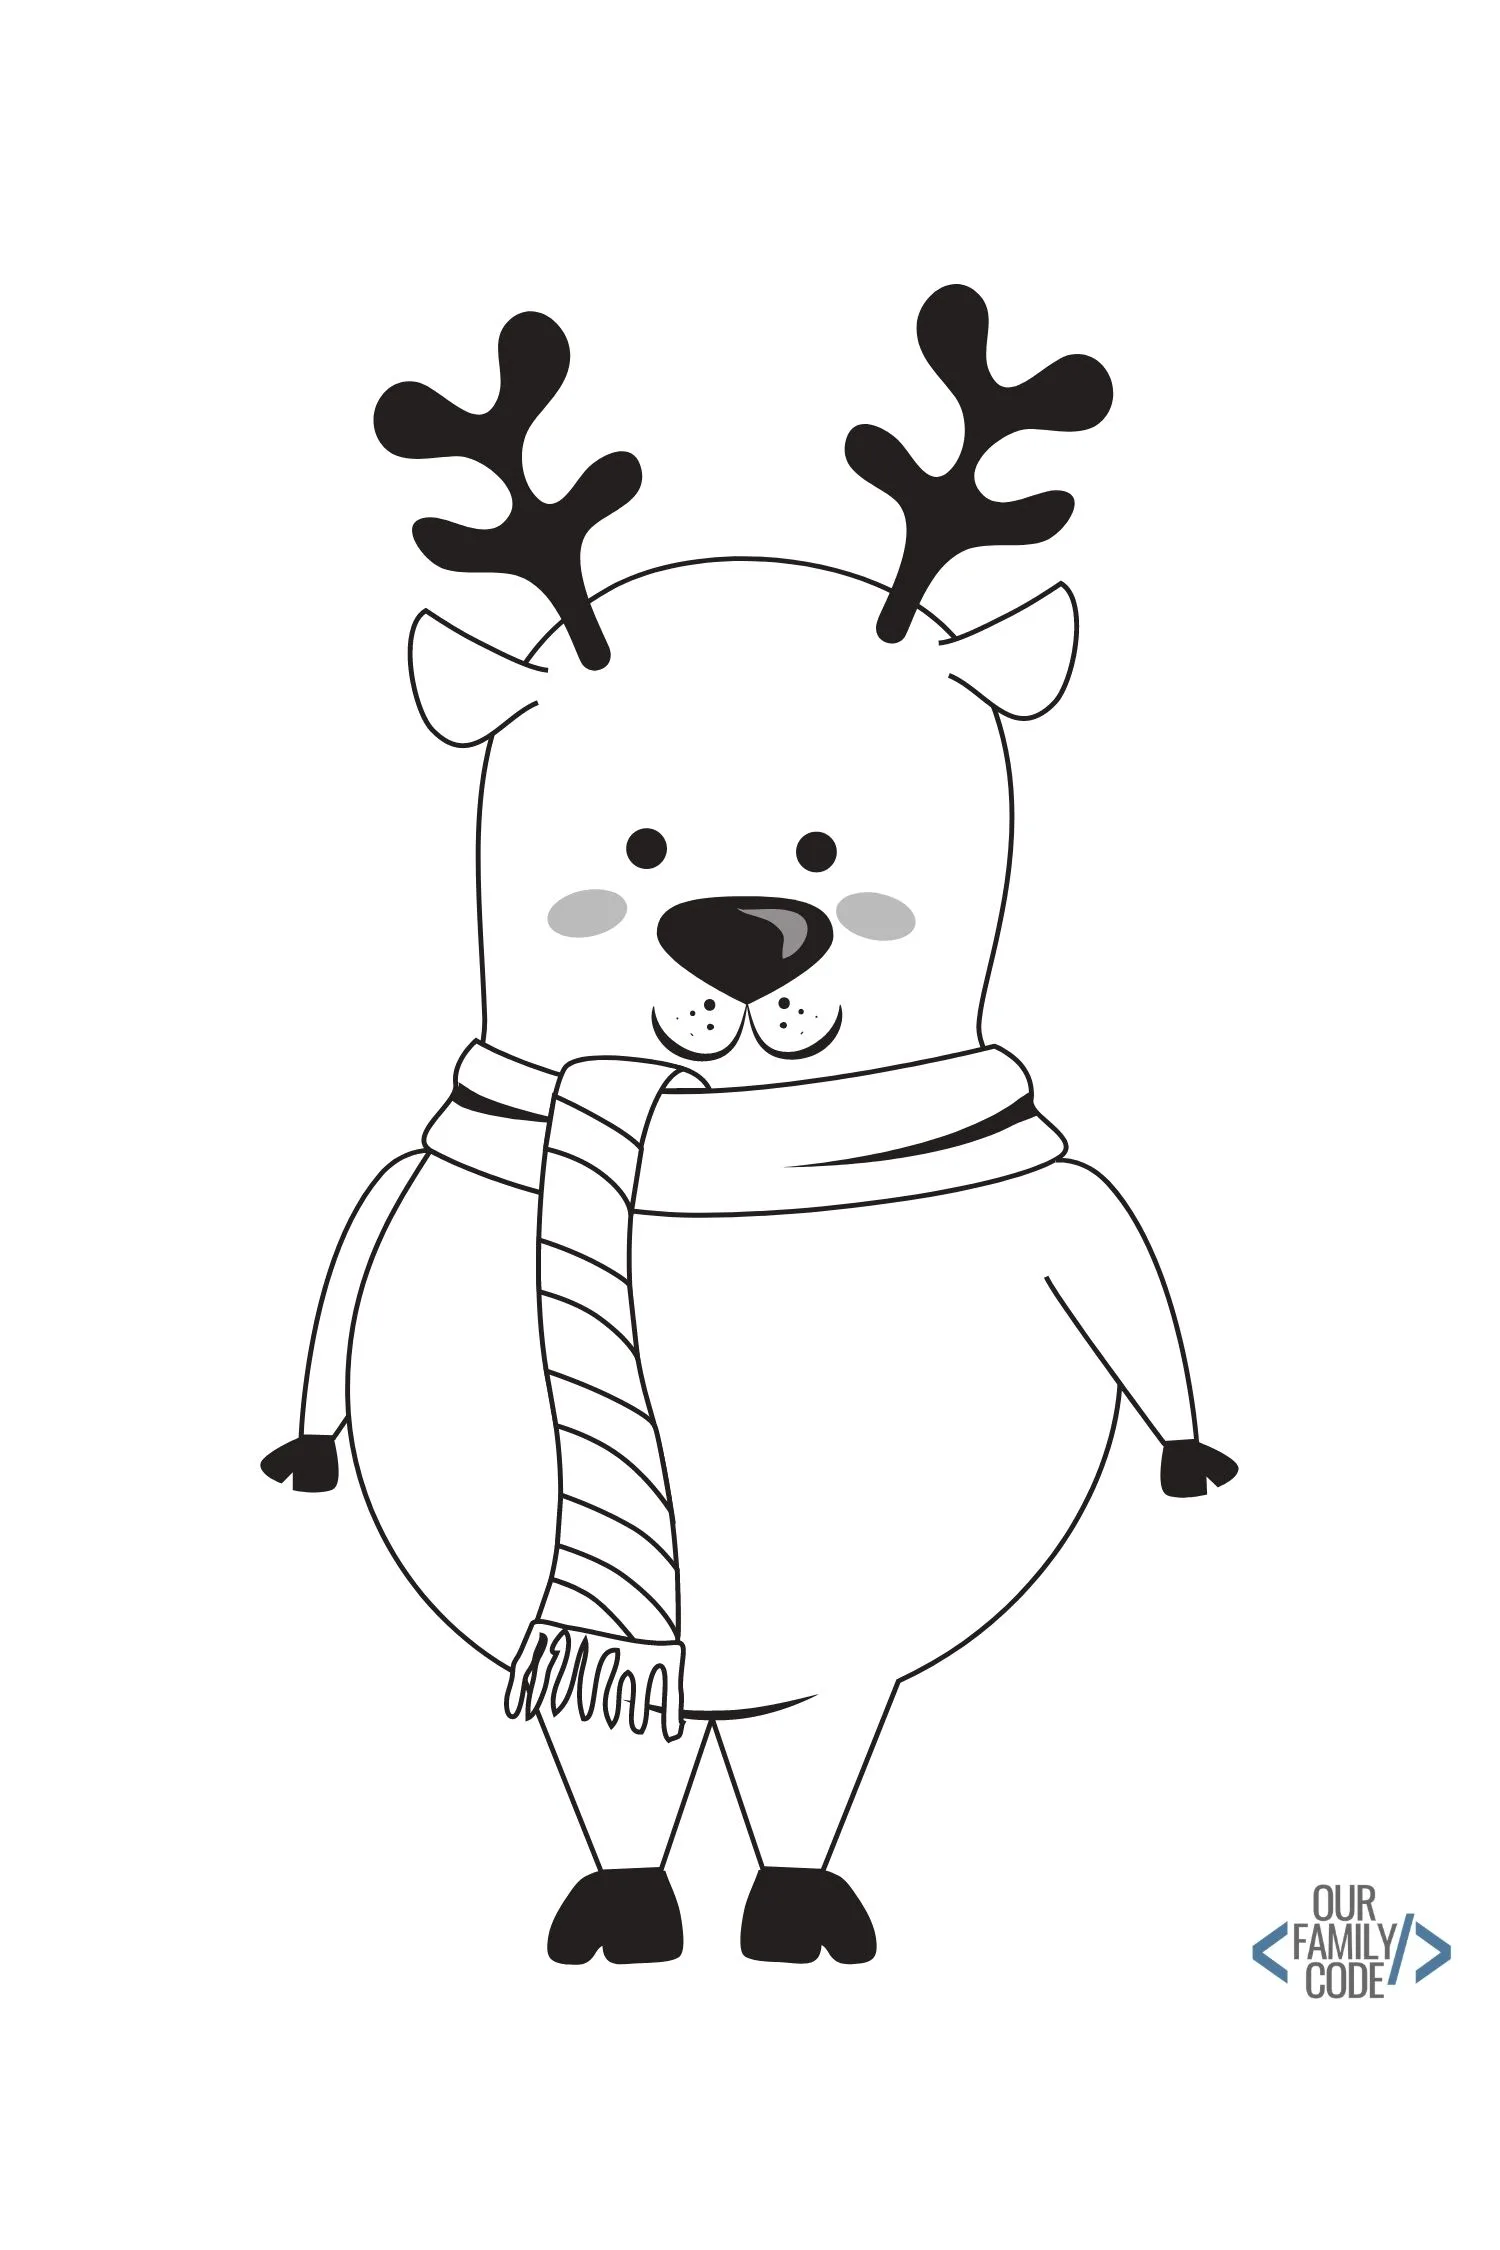 12 days of Free Christmas Worksheets for Kids Free Download Reindeer Coloring Page